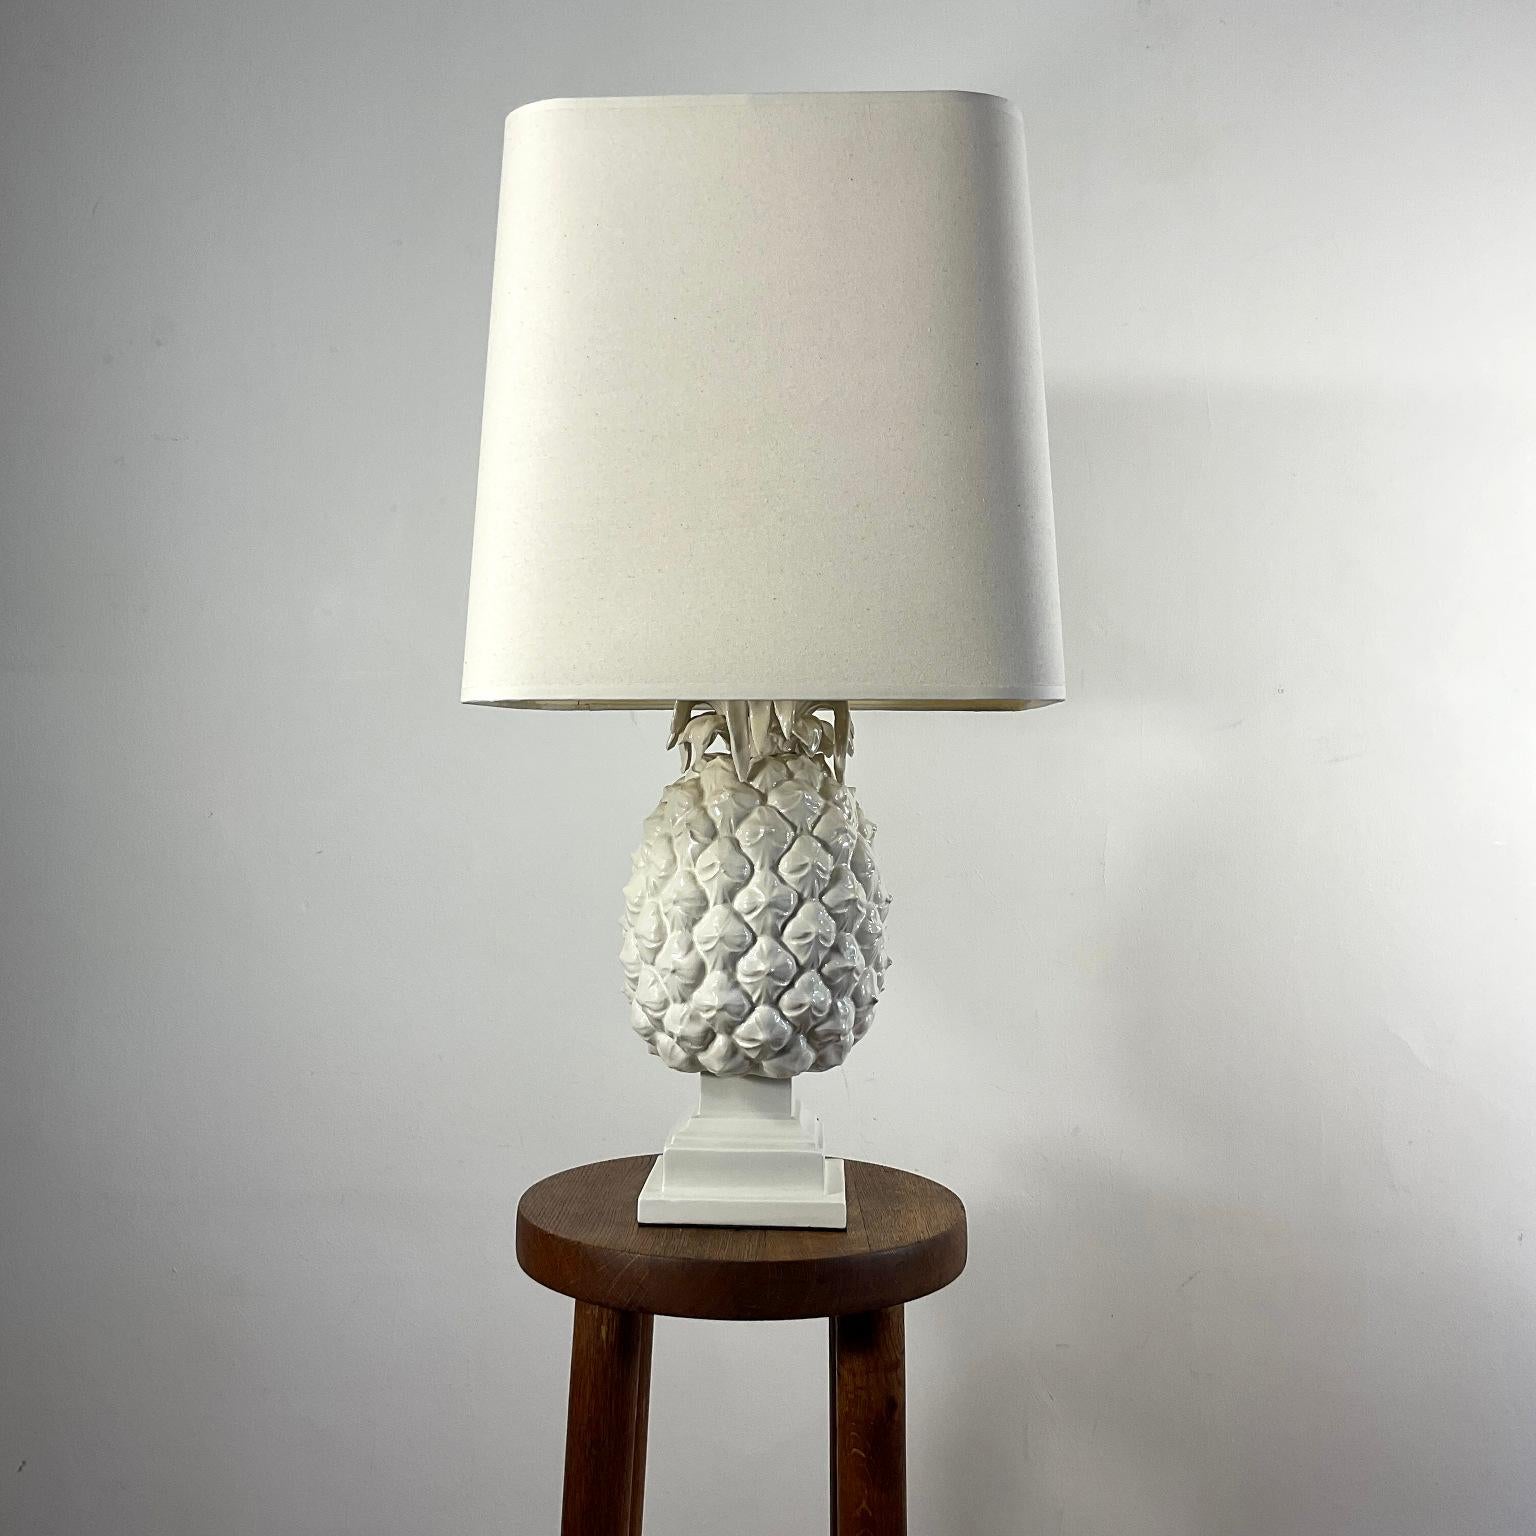 Pineapple Table Lamp in White Glazed Ceramic from Italy 1970s For Sale 5